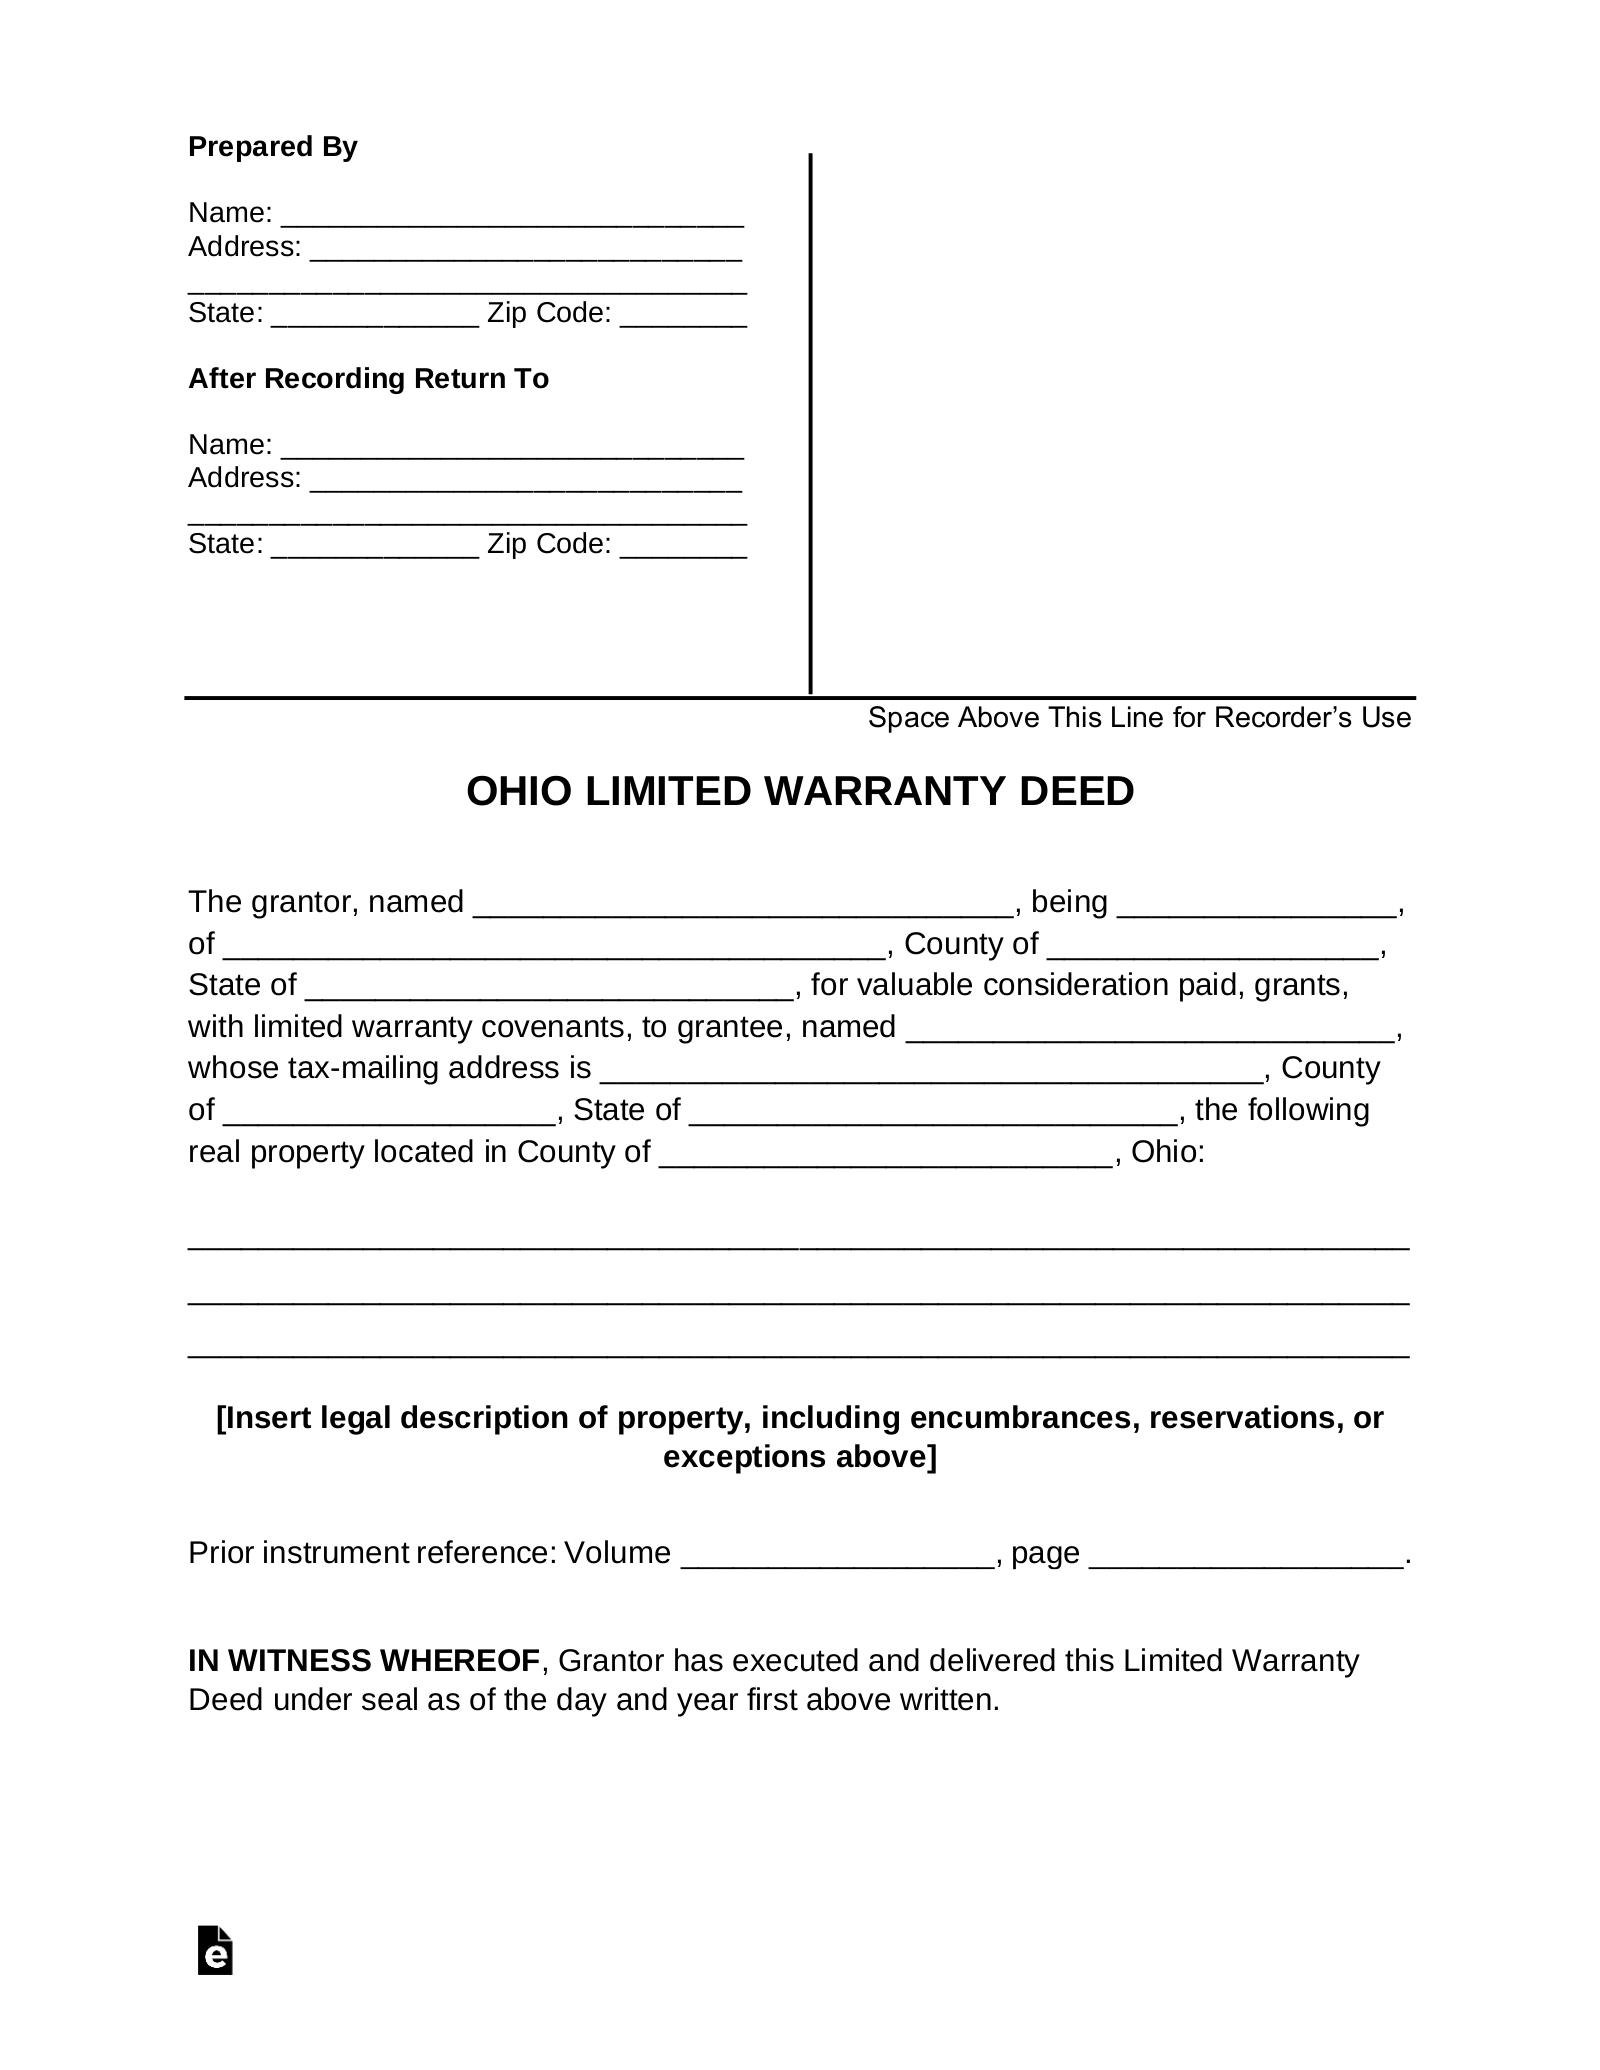 Ohio Limited (Special) Warranty Deed Form